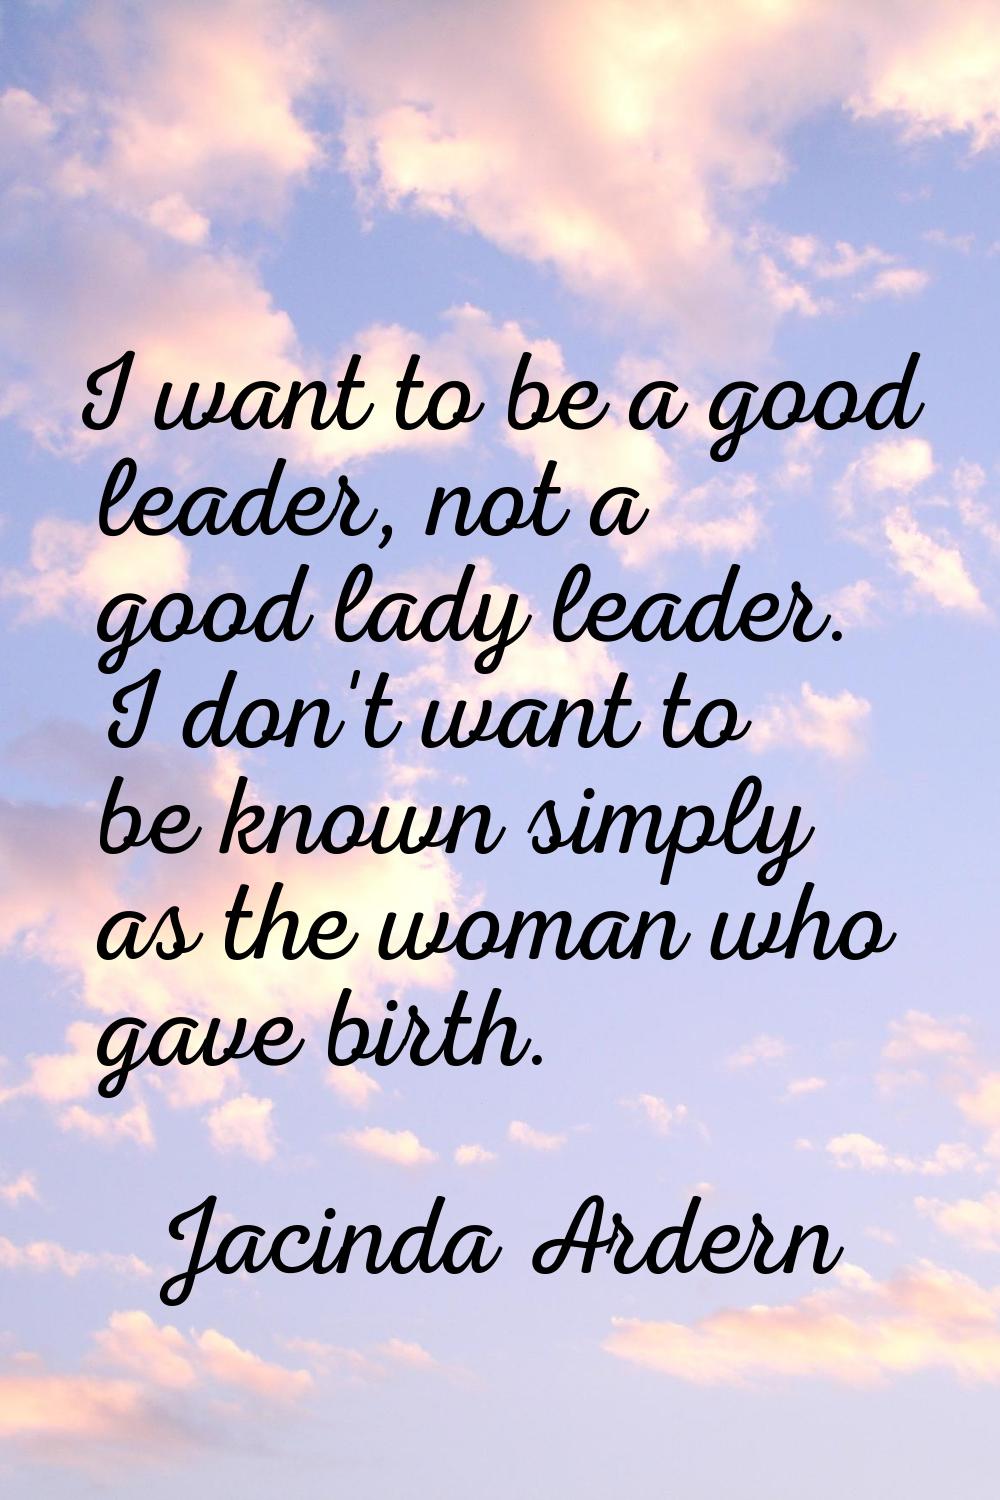 I want to be a good leader, not a good lady leader. I don't want to be known simply as the woman wh